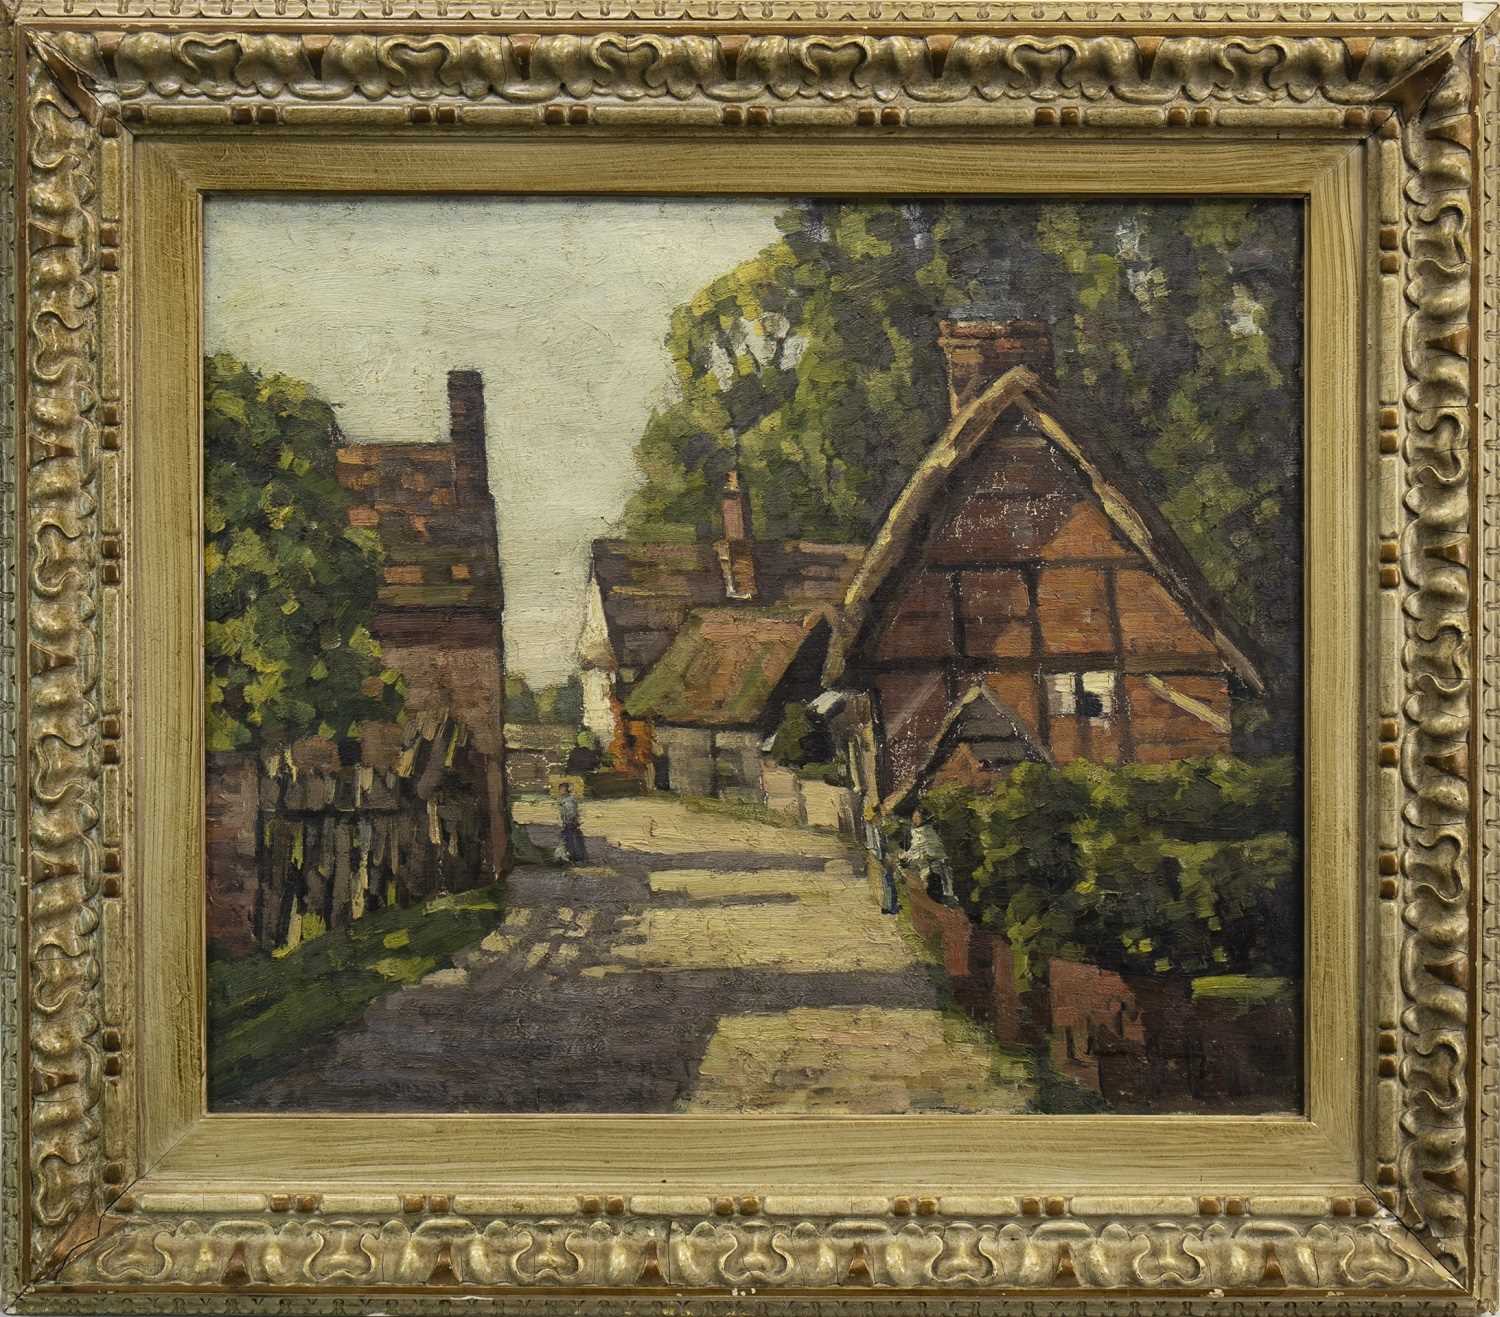 Lot 485 - VILLAGE SCENE WITH FIGURES, AN OIL